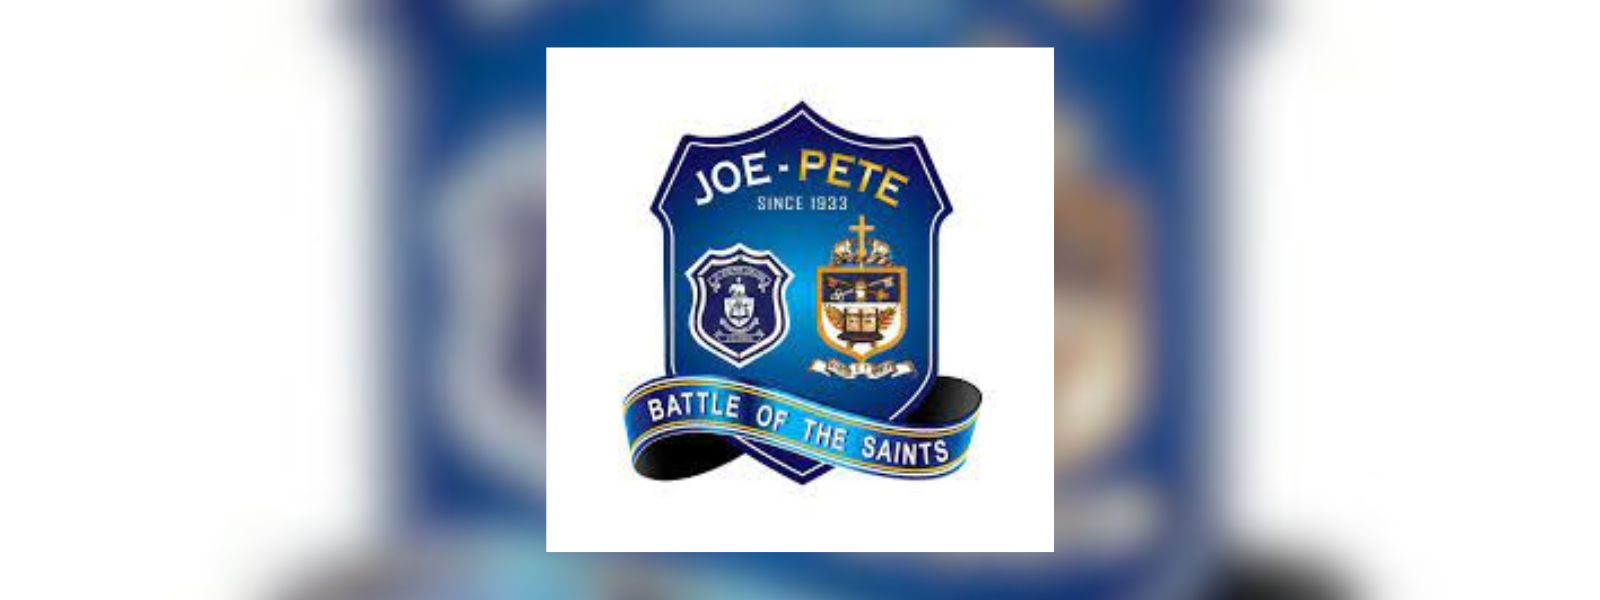 89th battle of the saints ends in draw